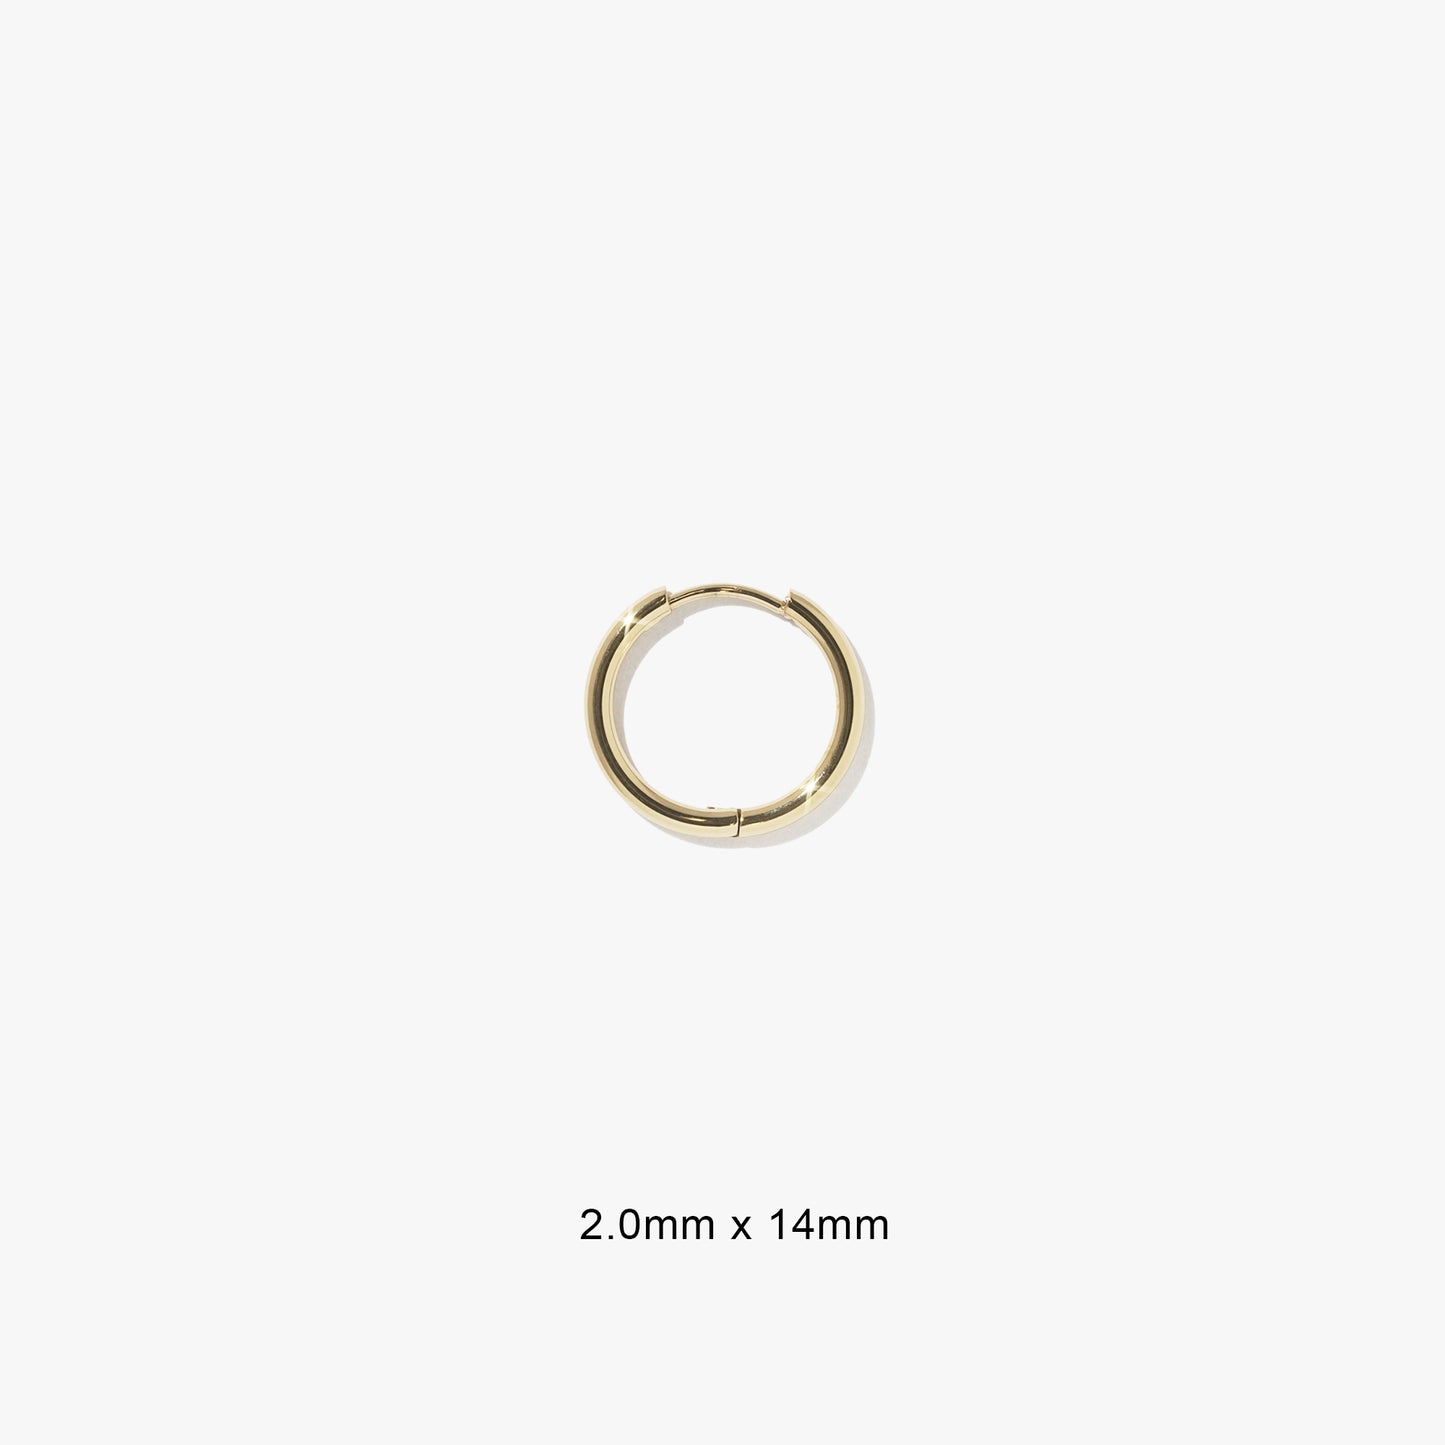 Gold / 14 mm